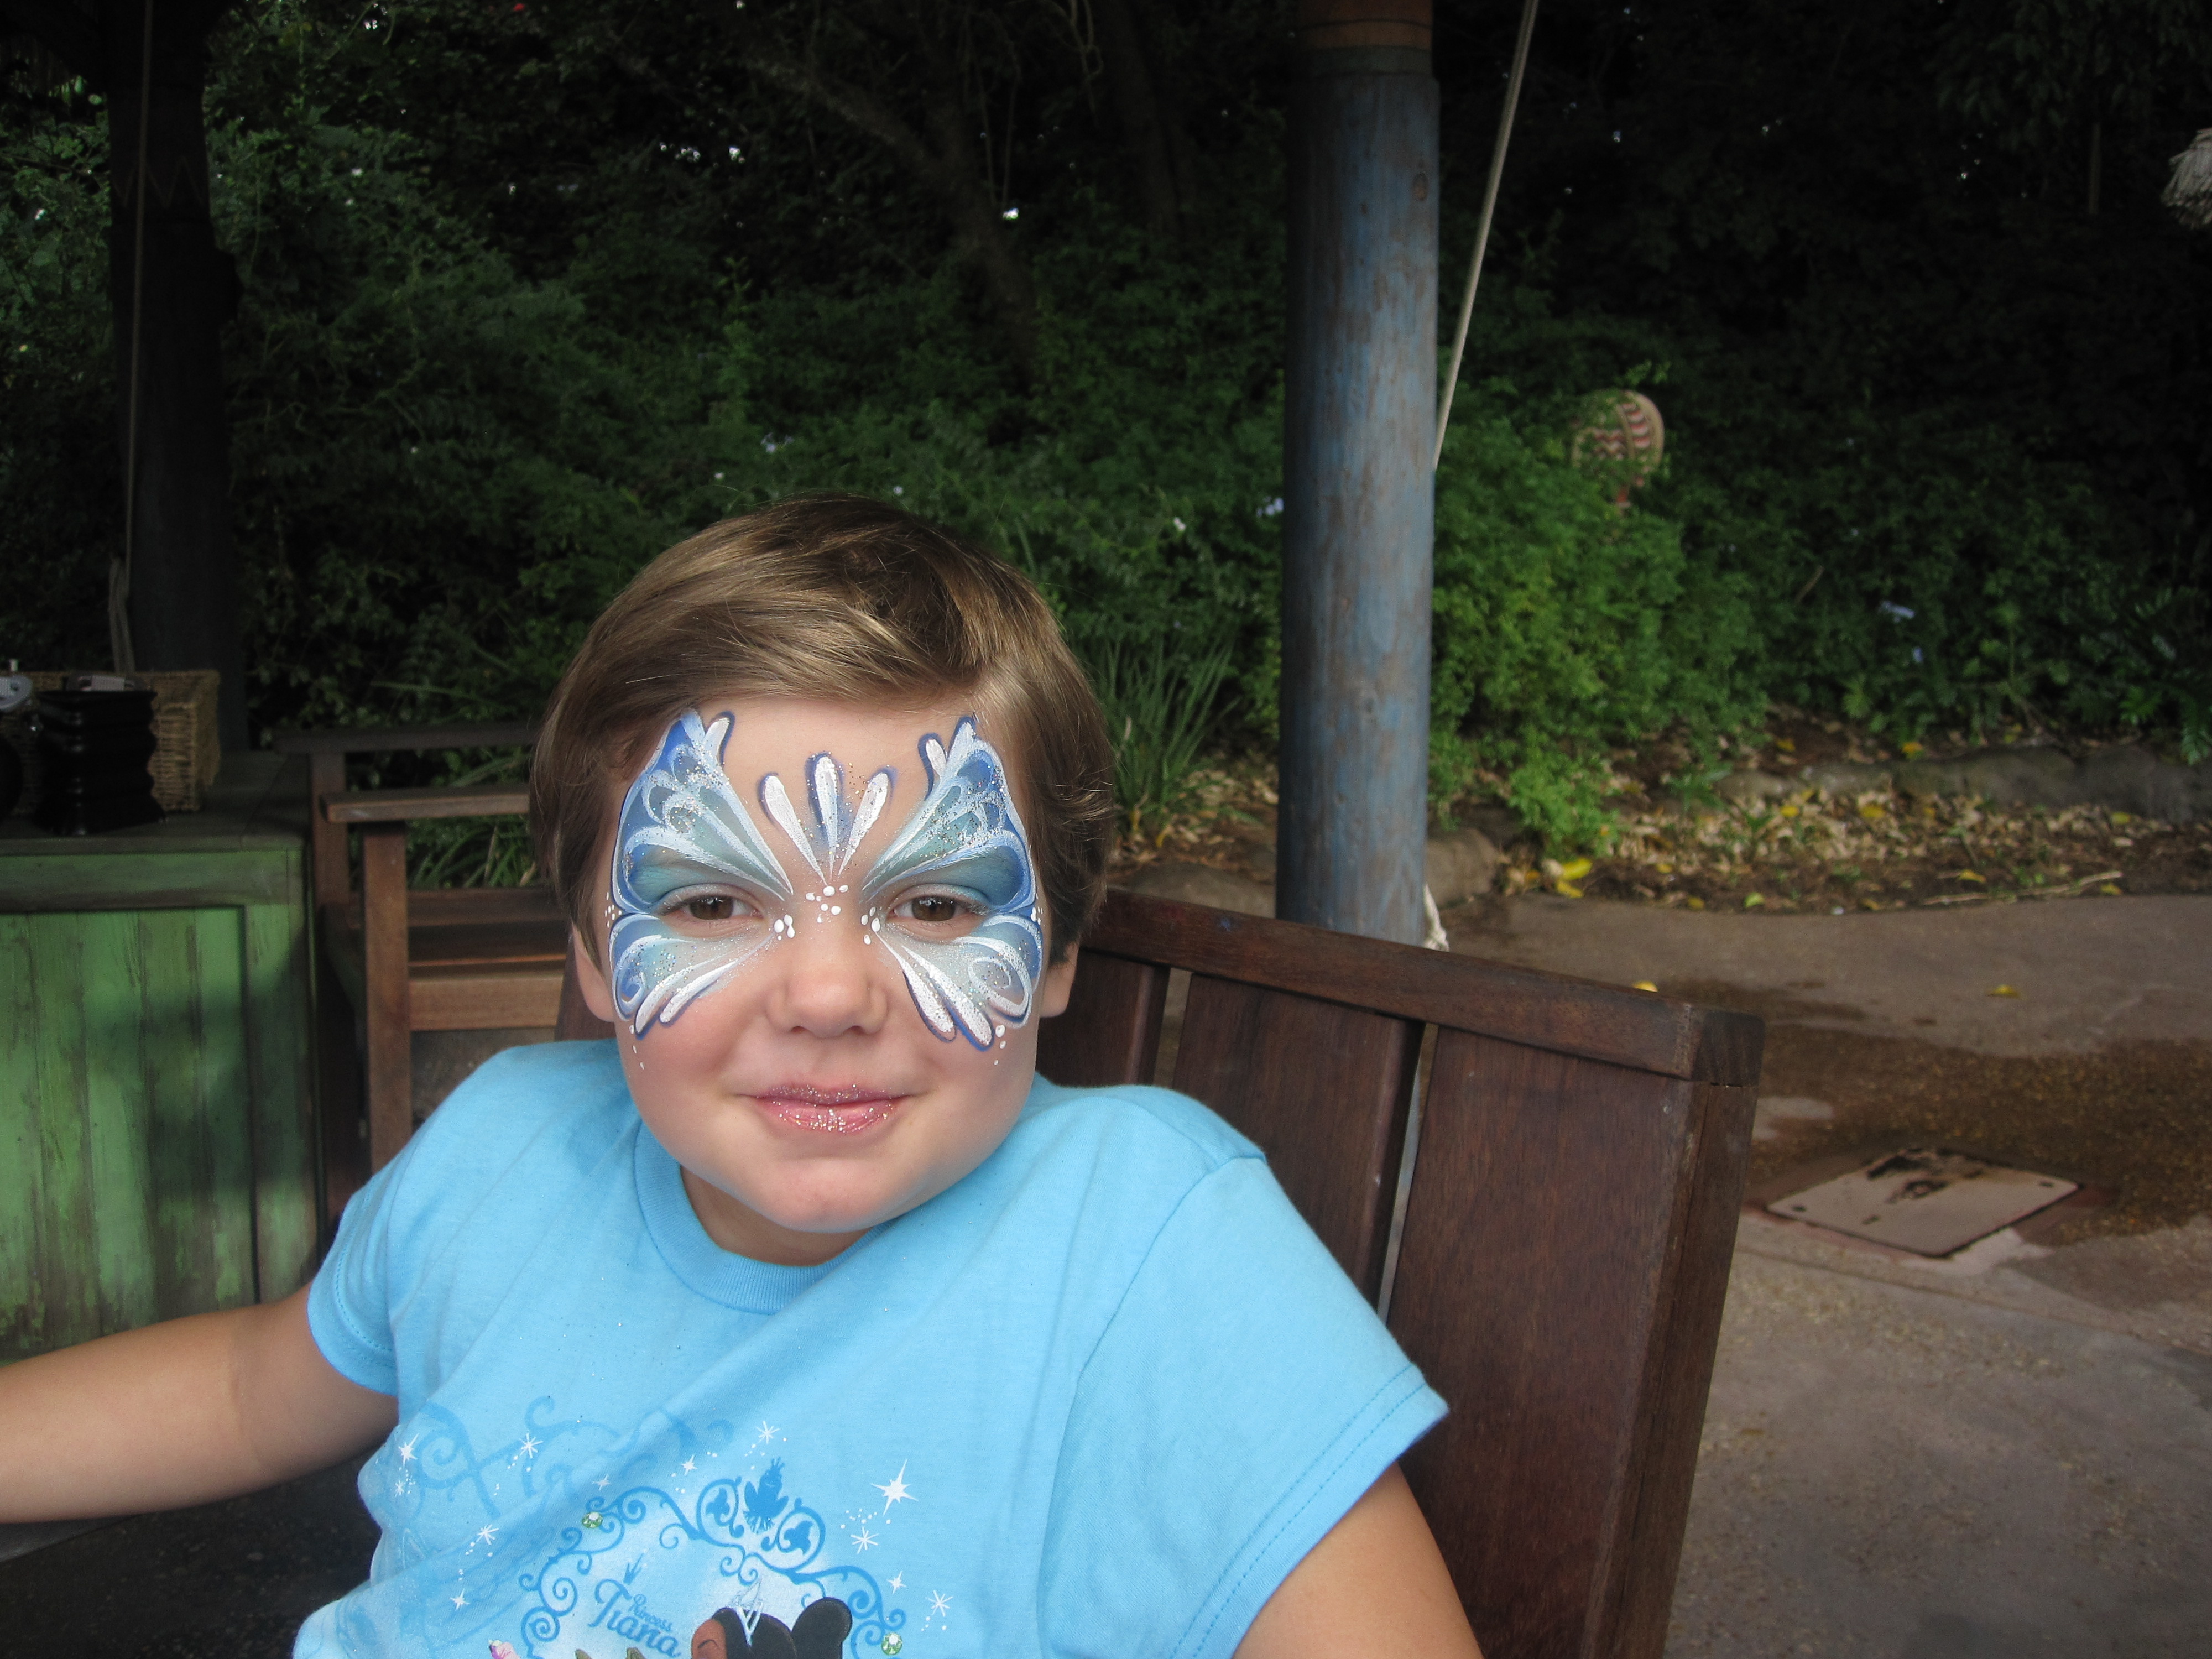 Face painting in Epcot, a must do (except when it's really, really hot)